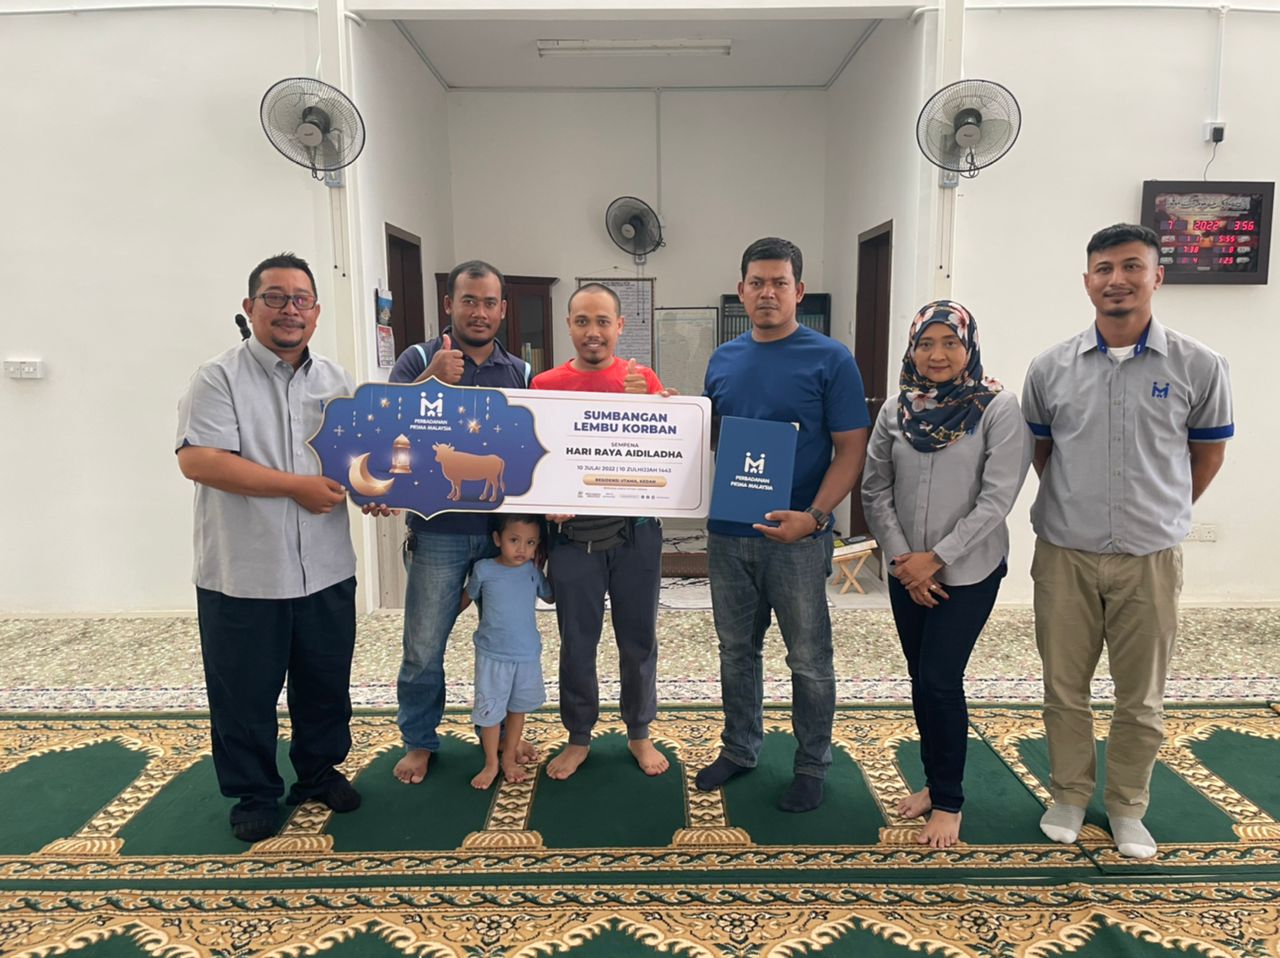 Cover image of Community Past Program: Qurban Programme – Contribution and sponsorships of cows which in line with the #PR1MAKita Aspiration at Residensi Utama, Kedah.